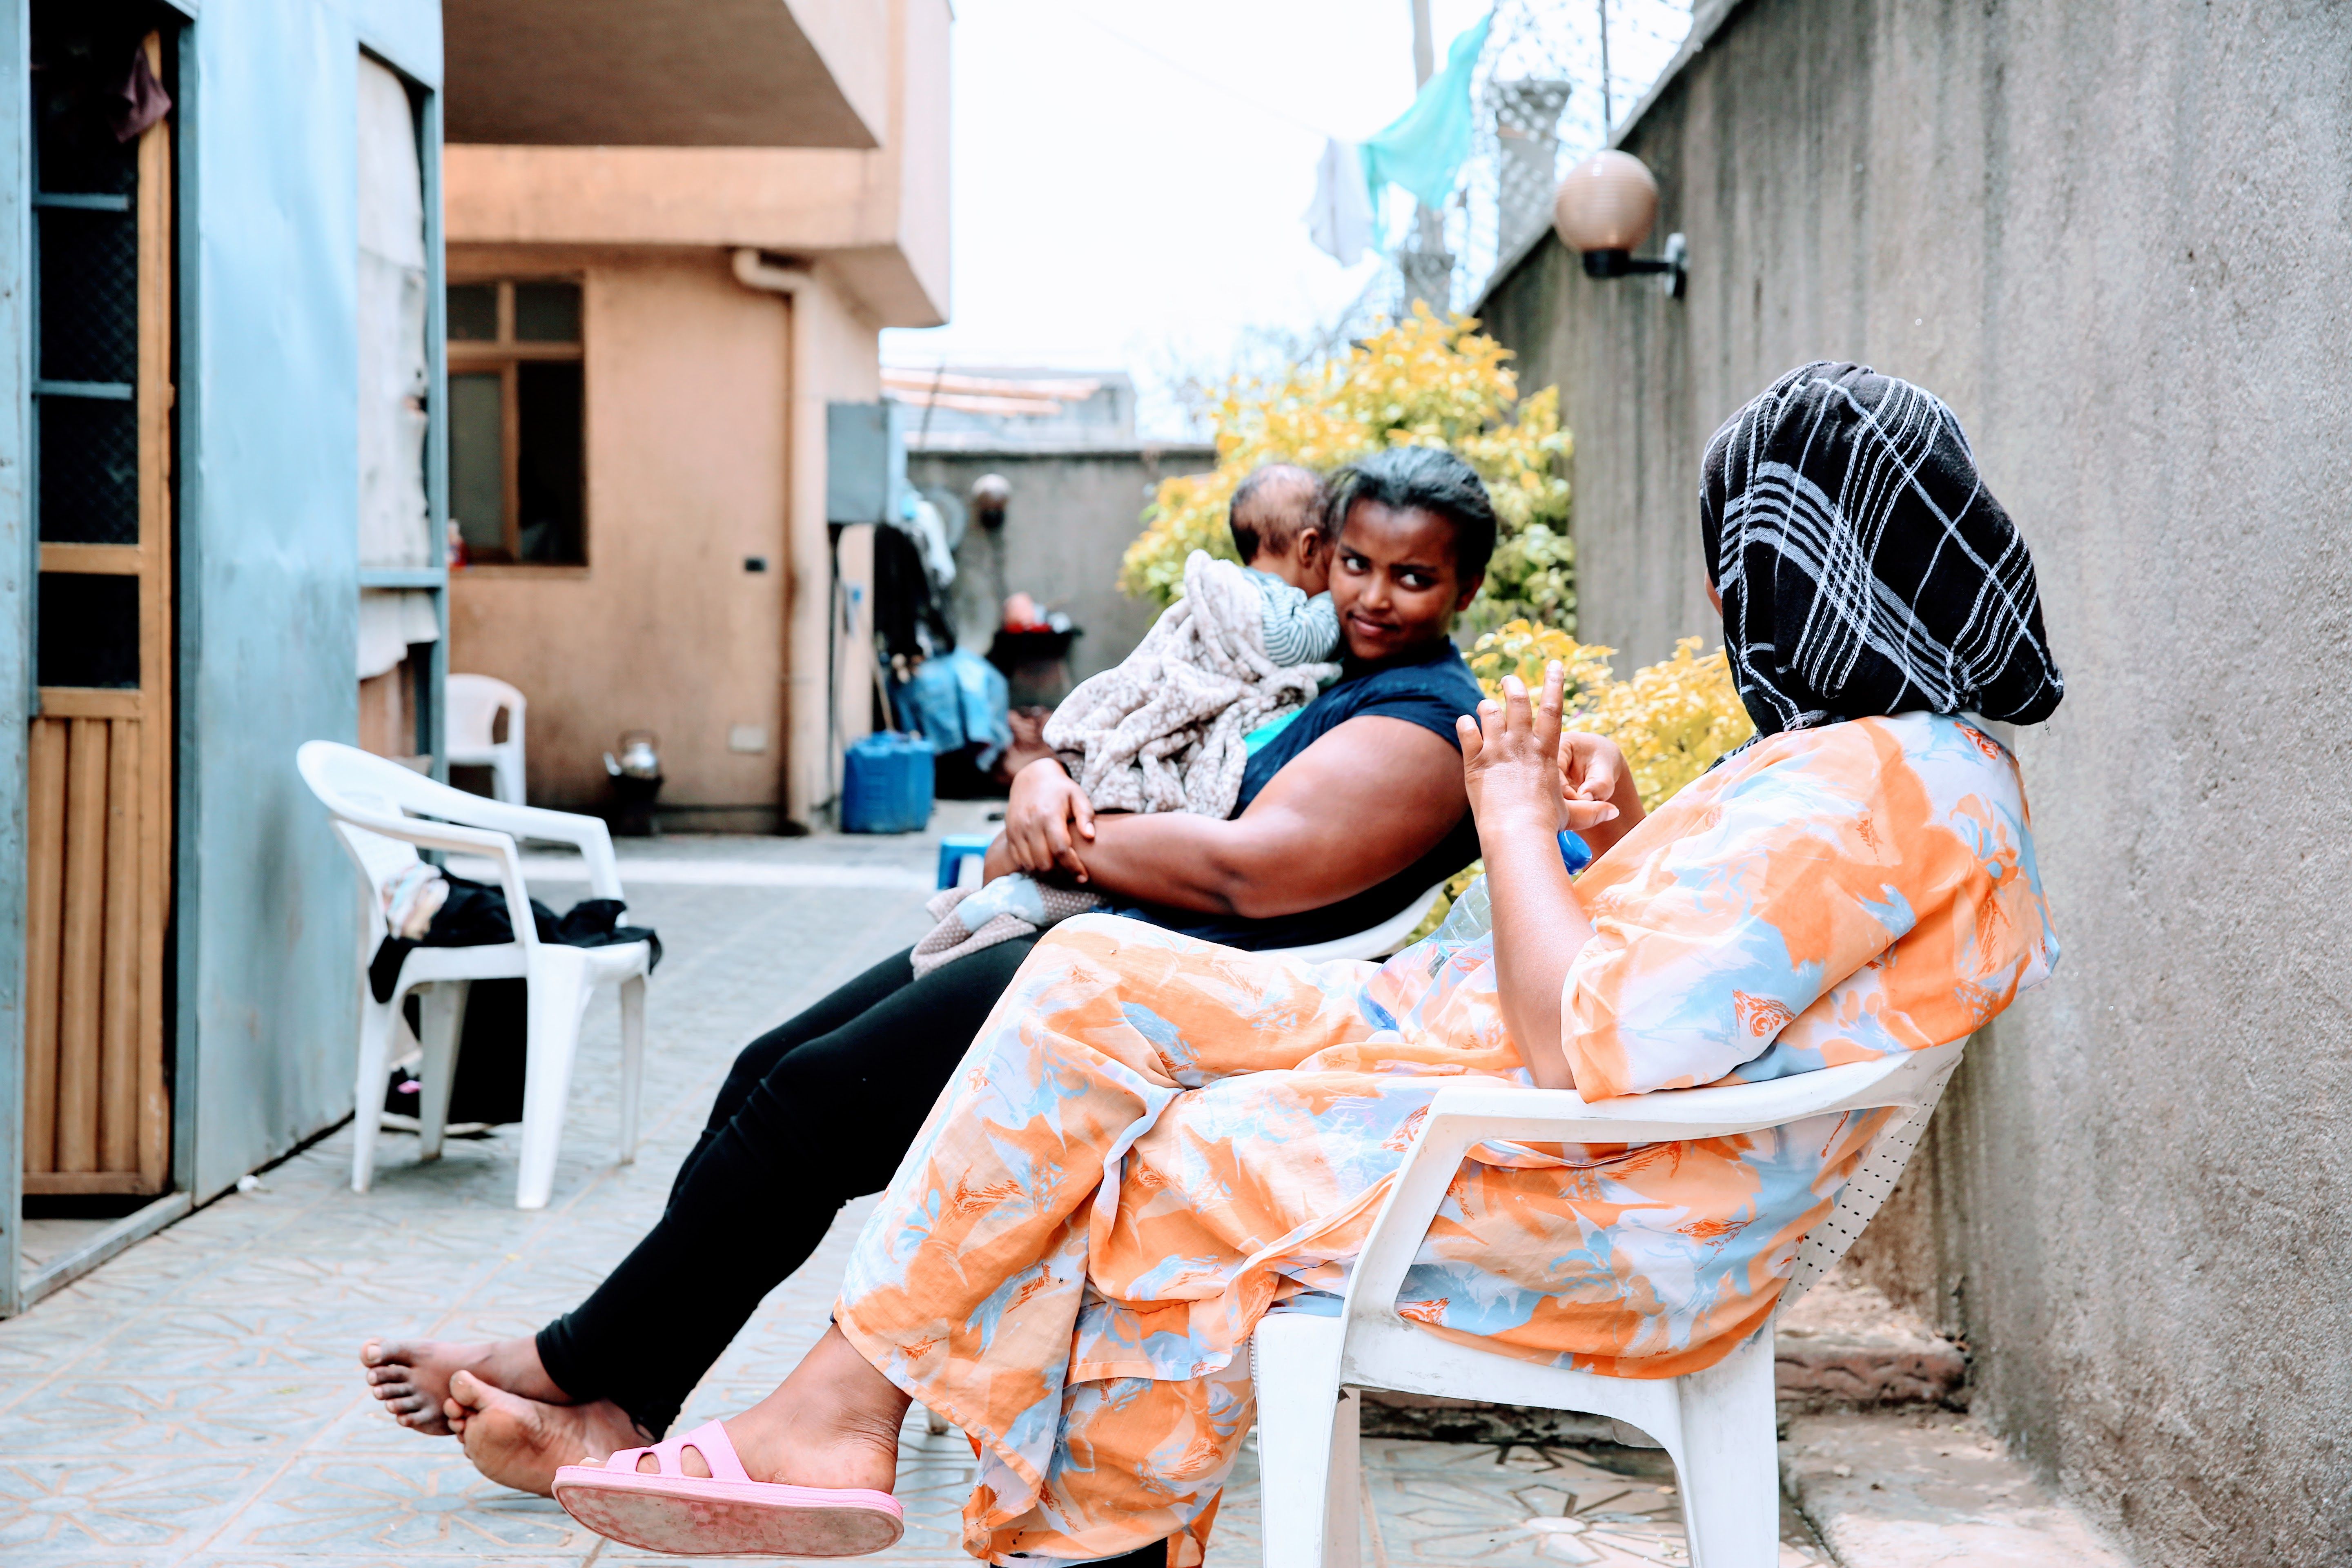 Women being cared for talk on the back patio of Agar. Image by Meklit Mersha. Ethiopia, 2019.